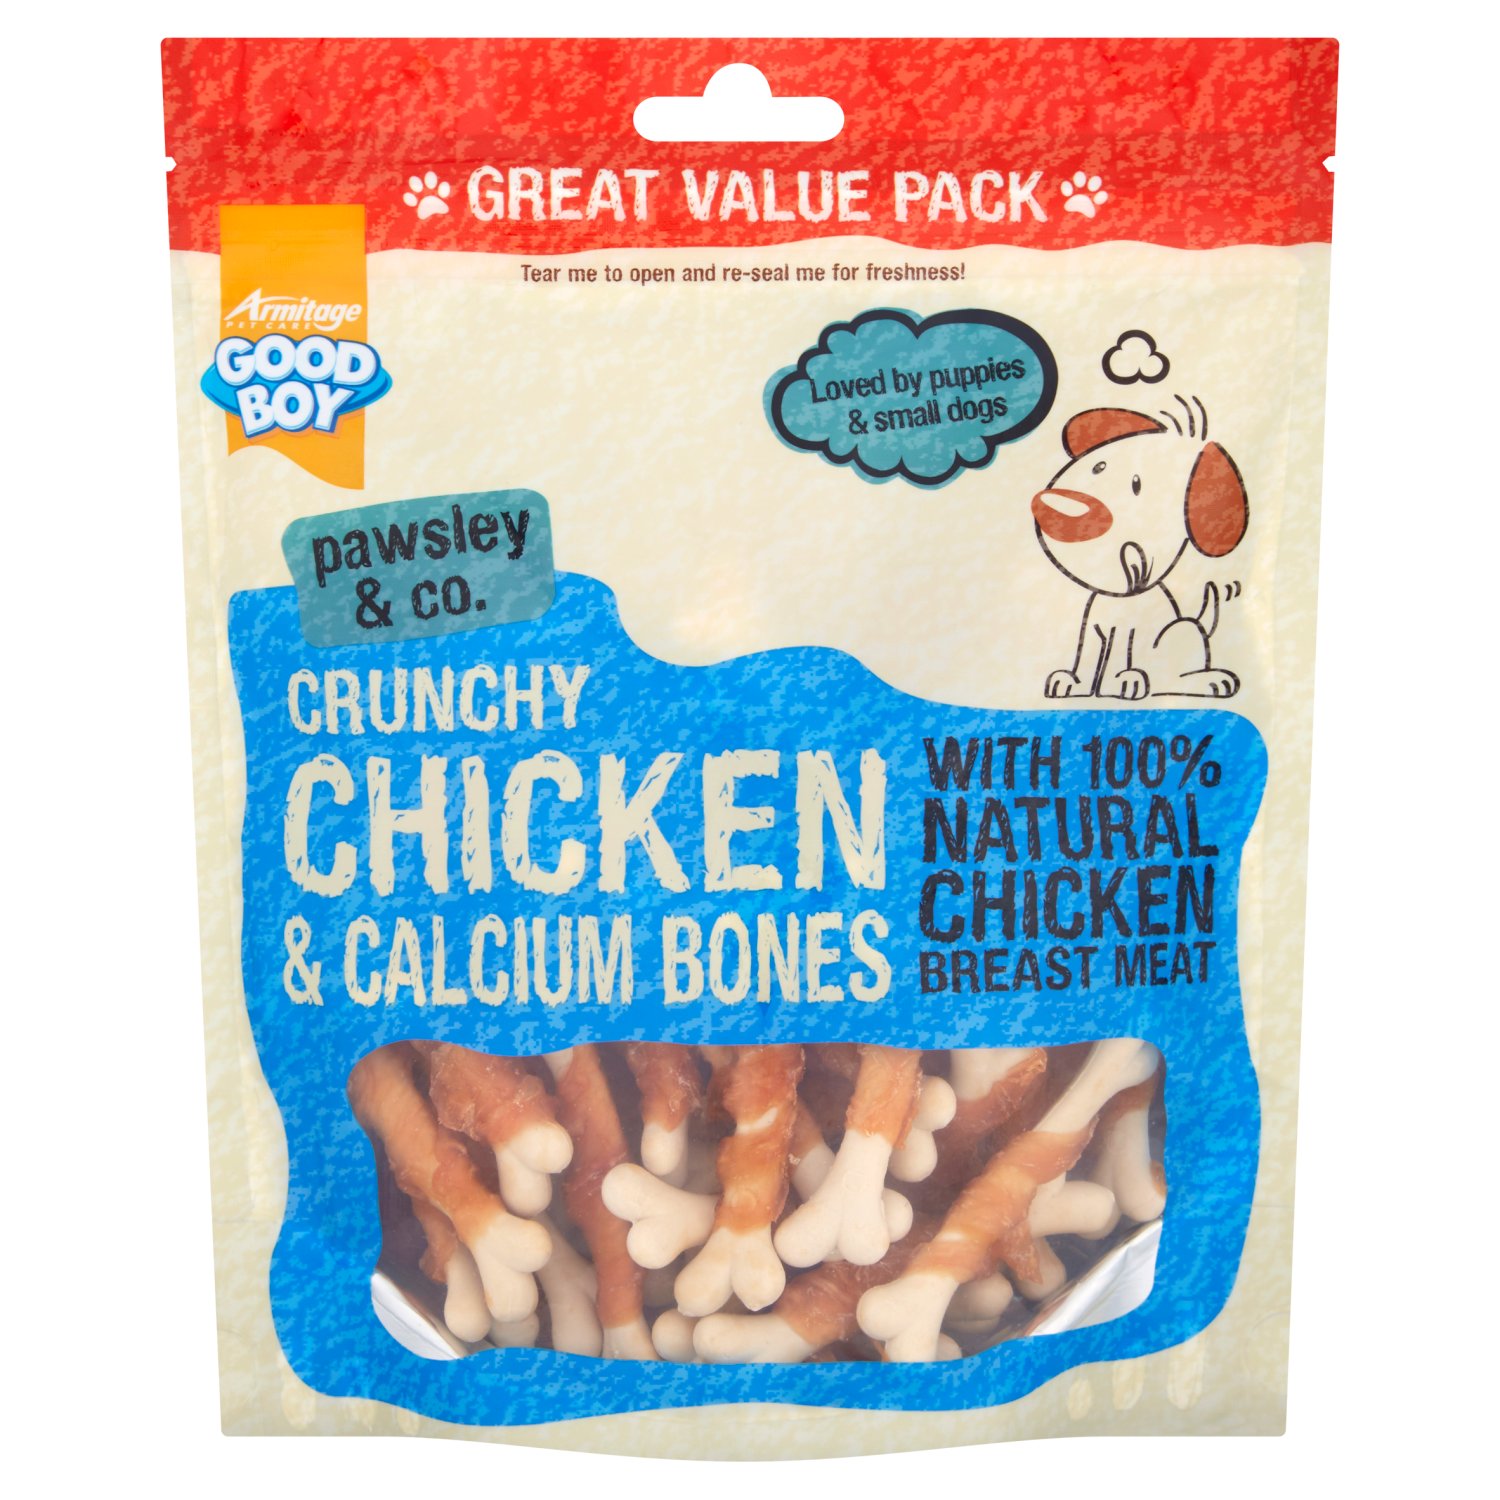 Making dogs' tails waggle is second nature at Good Boy pawsley & co. We produce really exciting, yummy treats to keep your dog happy as well as entertained.

These Crunchy Chicken and Calcium Bones are made with super duper tasty 100% natural chicken breast meat so are sure to become one of your dog's favourite treats. 

Lovingly packed in a handy, re-sealable bag, as well as being lip smackingly tasty they are full of natural goodness too as they are;

Made with 100% natural human grade chicken breast meat
Only 1% fat 
Wheat and cereal free - ideal for sensitive tummies
Contain no artificial nasties such as colours or flavours 
With calcium to promote healthy teeth and bones

What's more, the crunchy texture also makes these tasty little treats great for your dog's dental hygiene. Its simple really, all dogs like to chew - it's a natural instinct. Chewing can not only provide your dog with stimulation but more importantly it may help reduce the risk of gum disease and tooth loss by help keep your dog's jaws strong and teeth clean.

What's not to love?